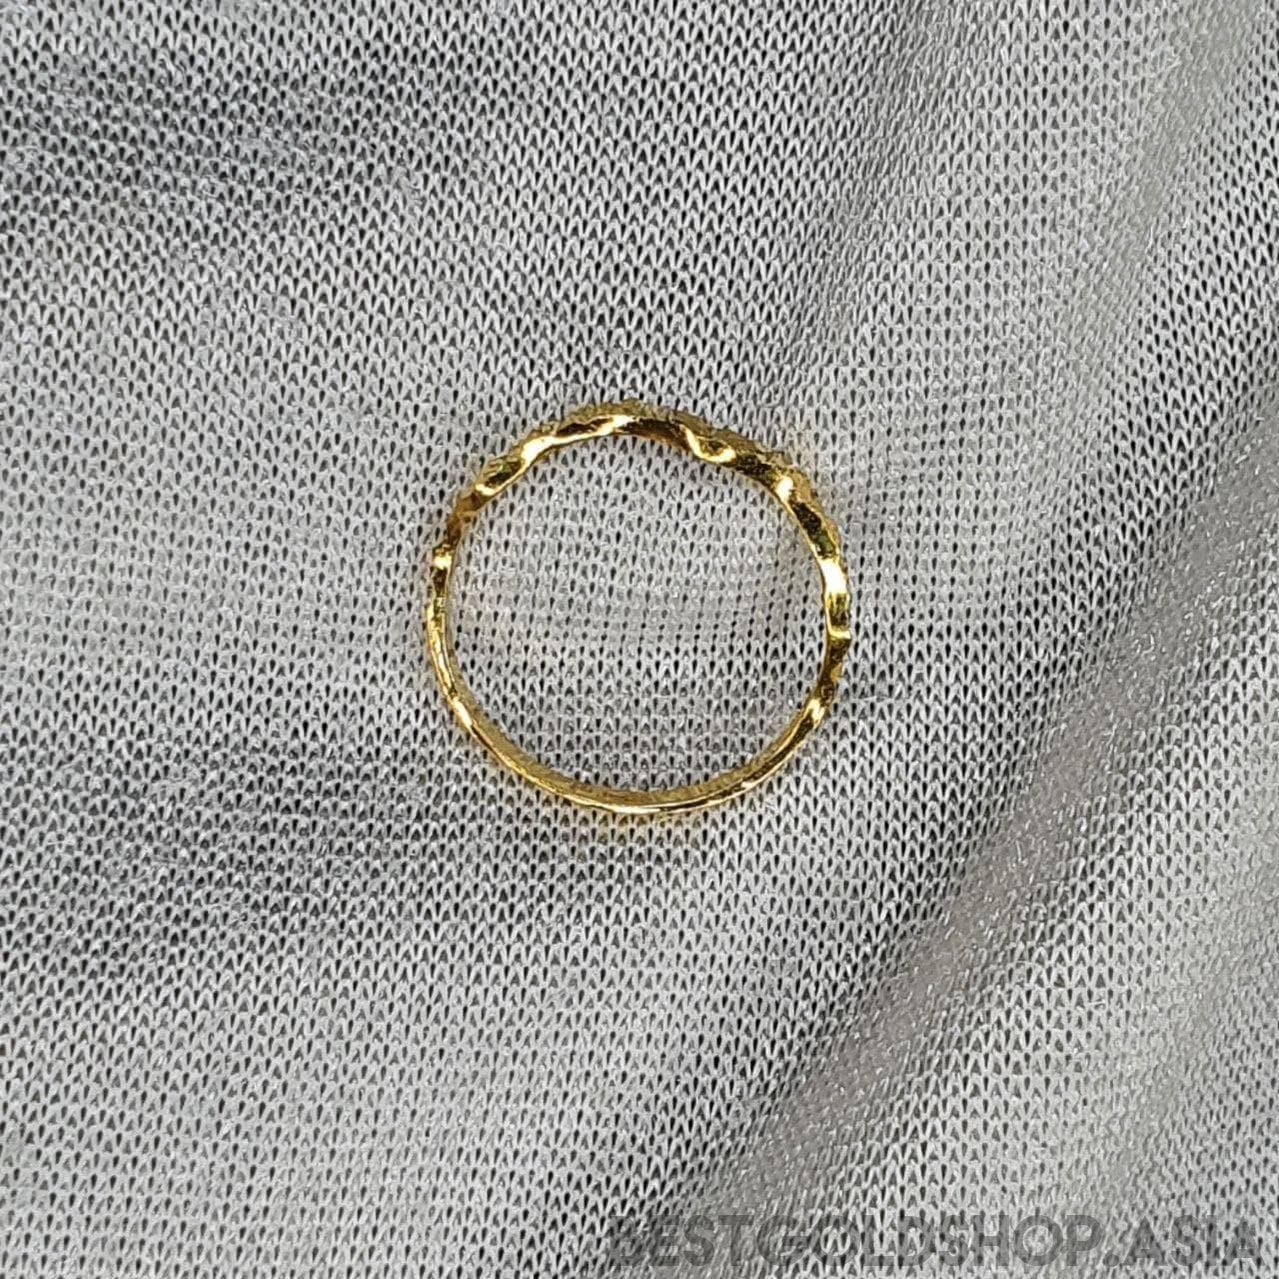 22k / 916 Gold wave pinky ring-916 gold-Best Gold Shop